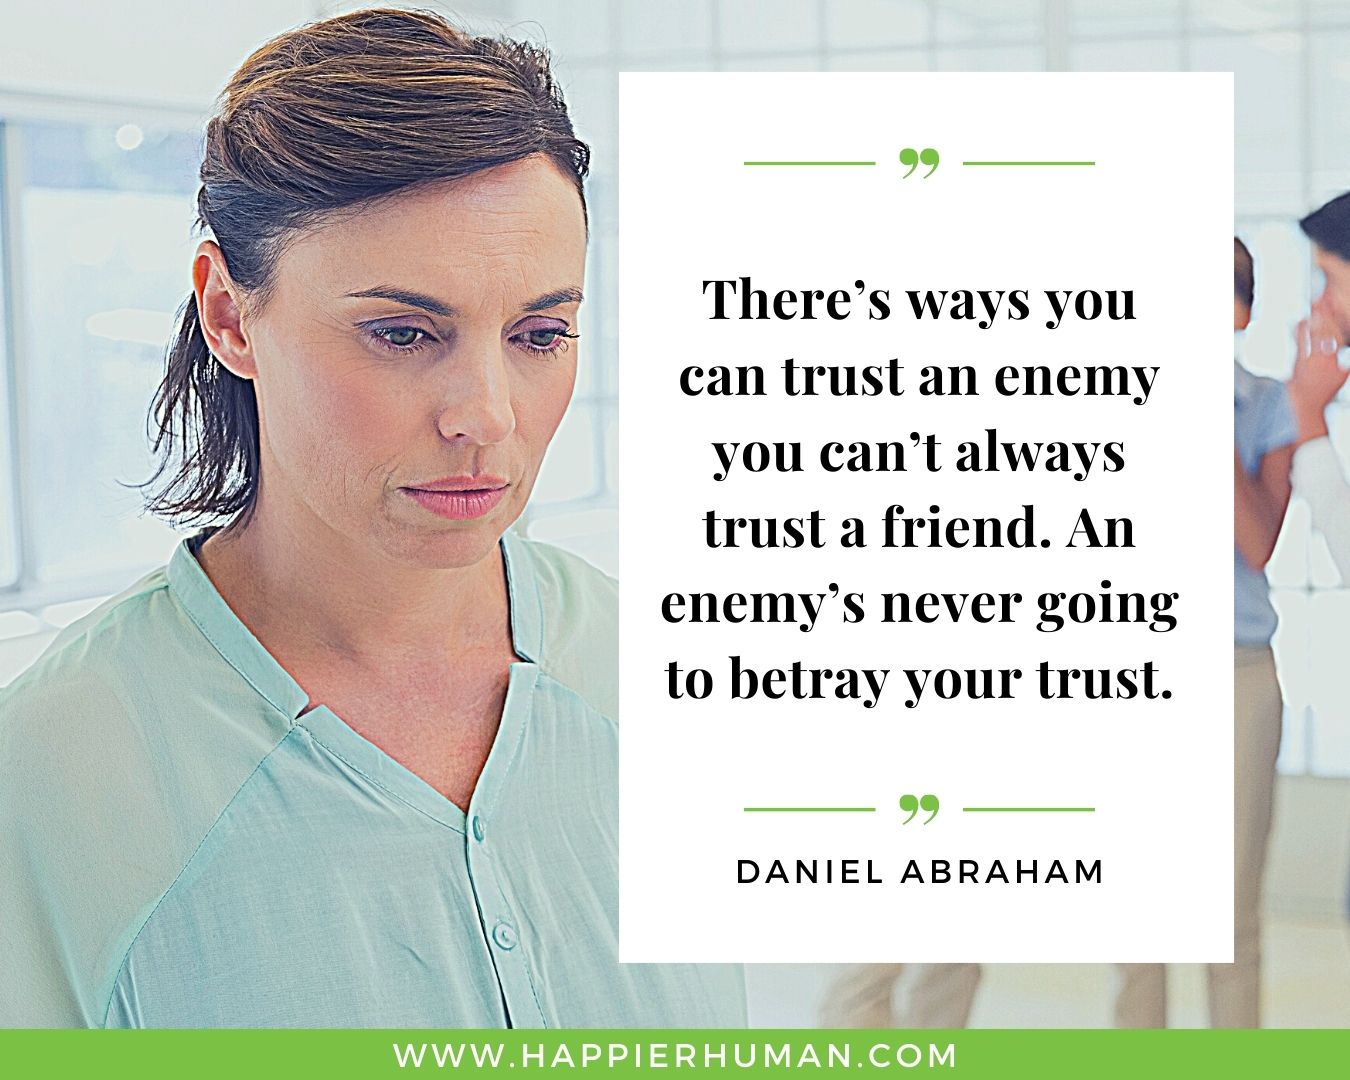 Broken Trust Quotes - “There’s ways you can trust an enemy you can’t always trust a friend. An enemy’s never going to betray your trust.” - Daniel Abraham